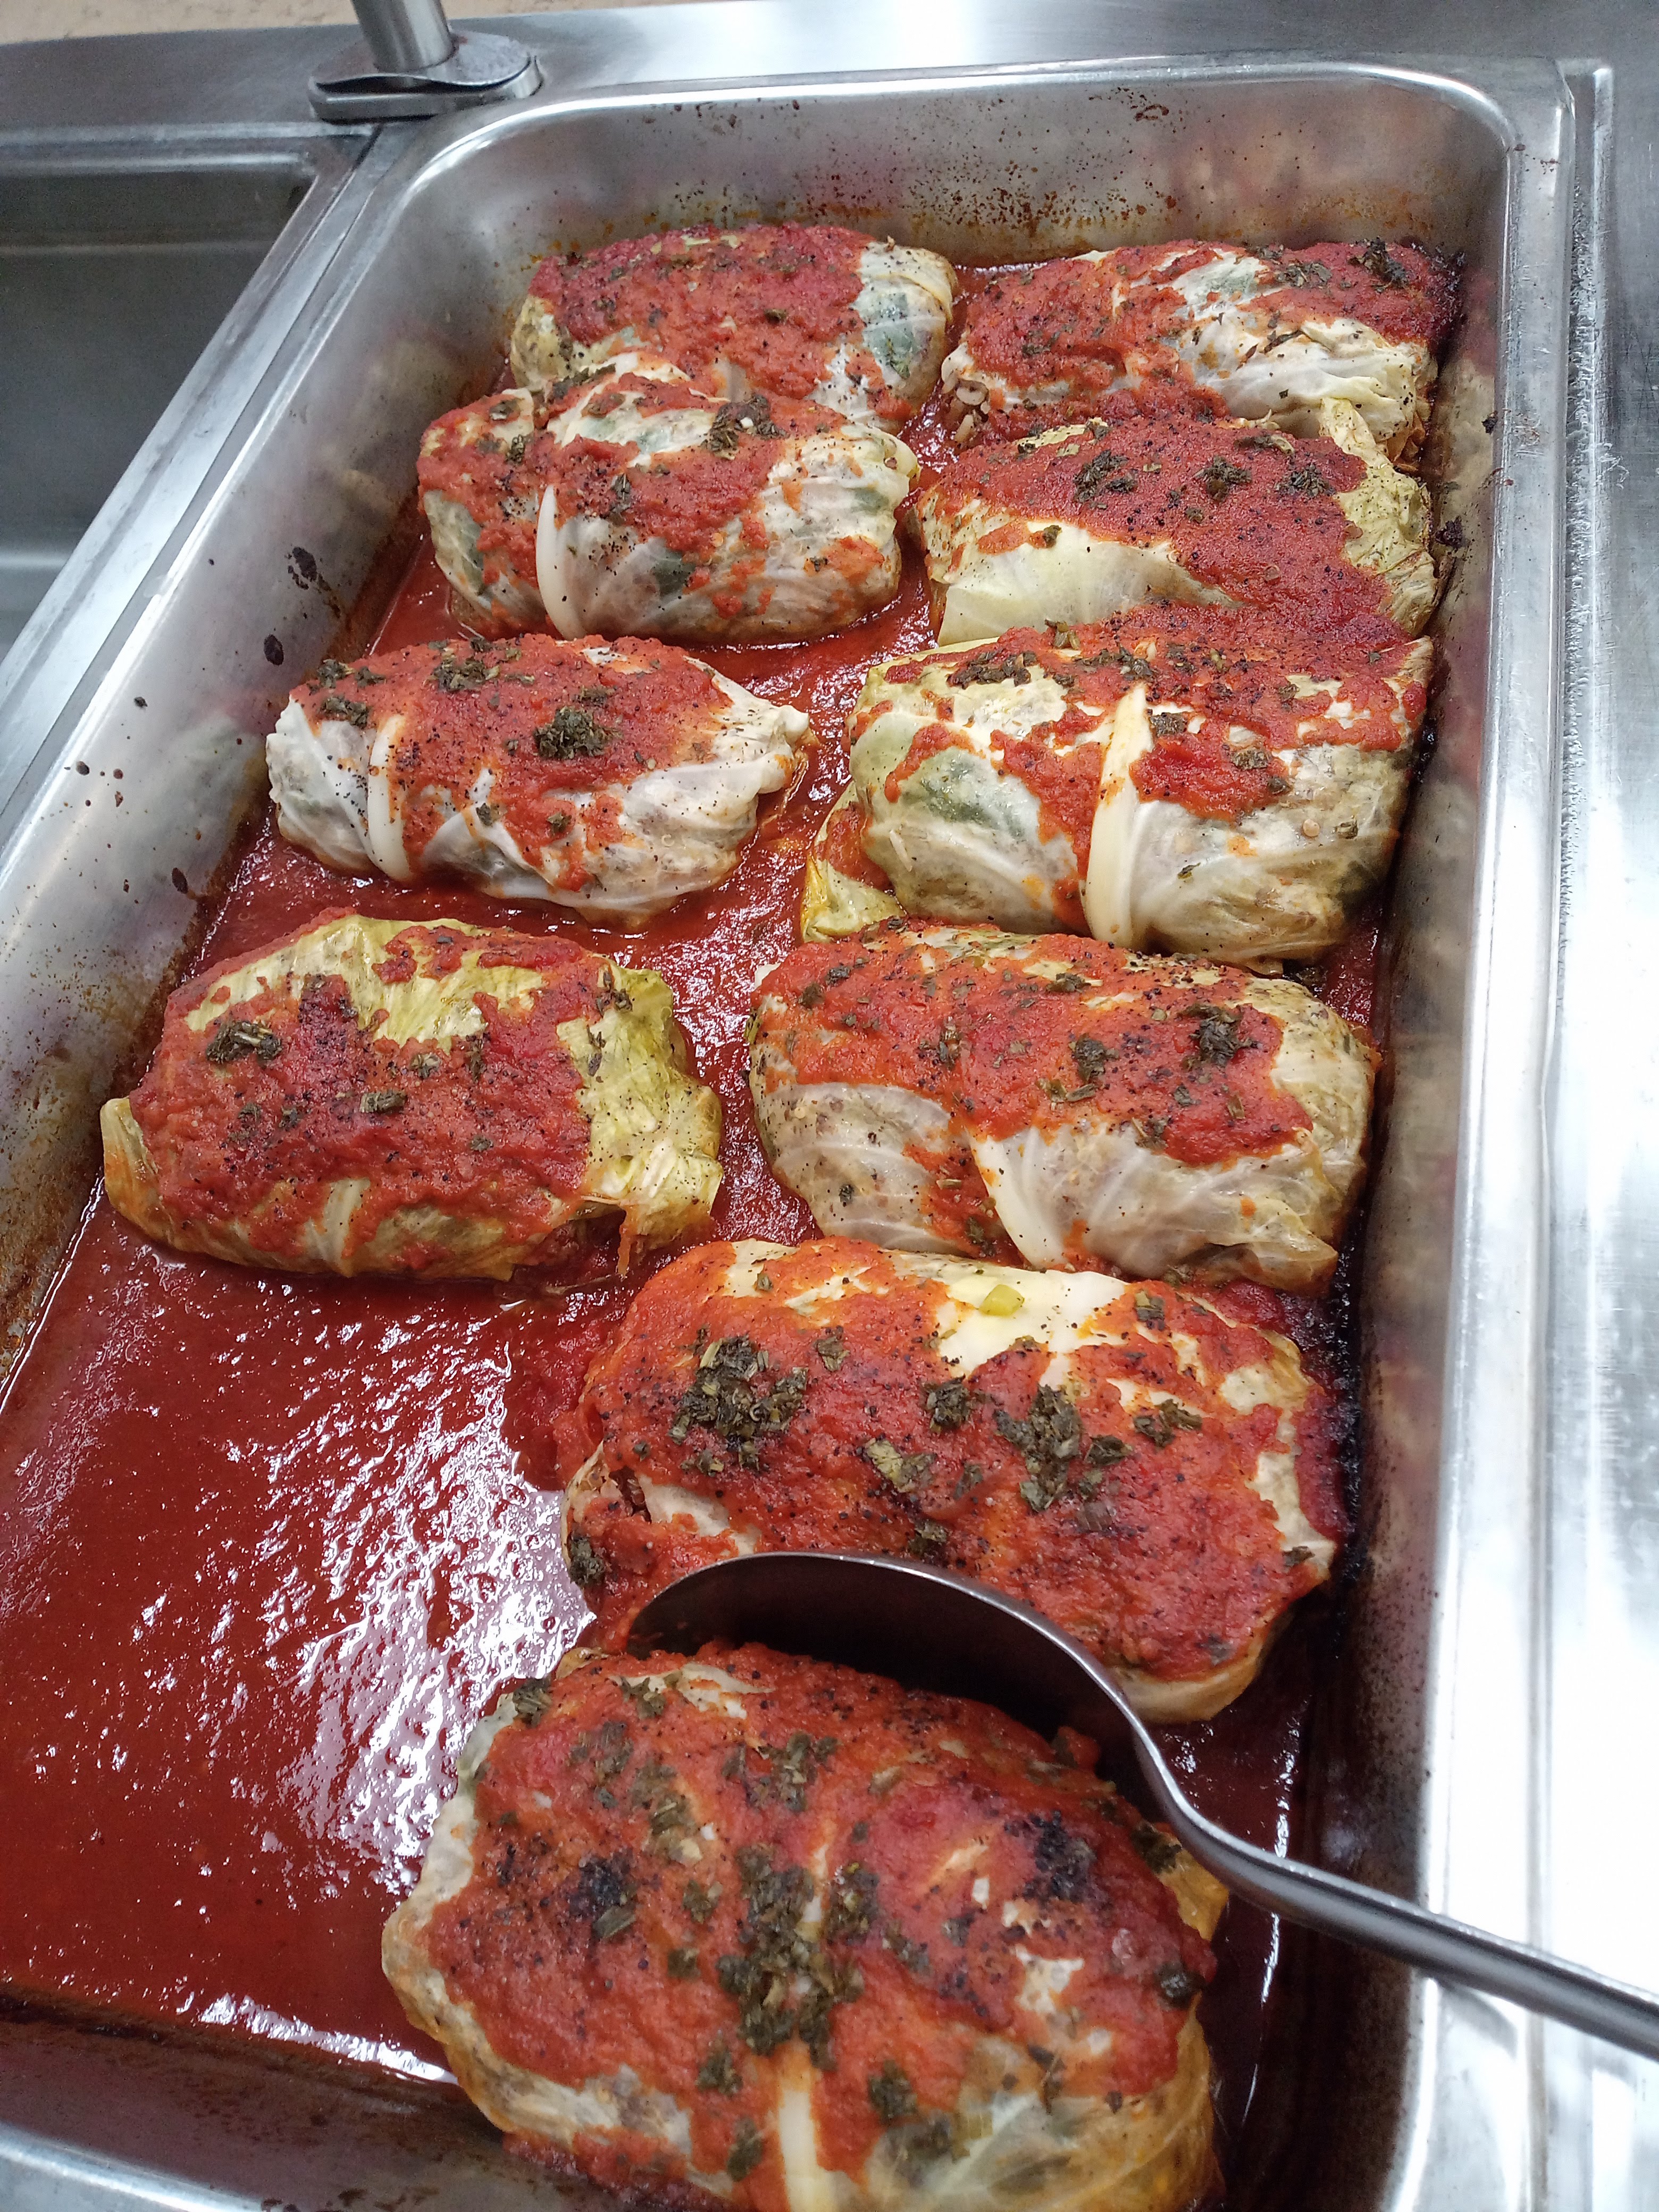 a metal hotel pan filled with stuffed cabbage rolls topped with red tomato sauce